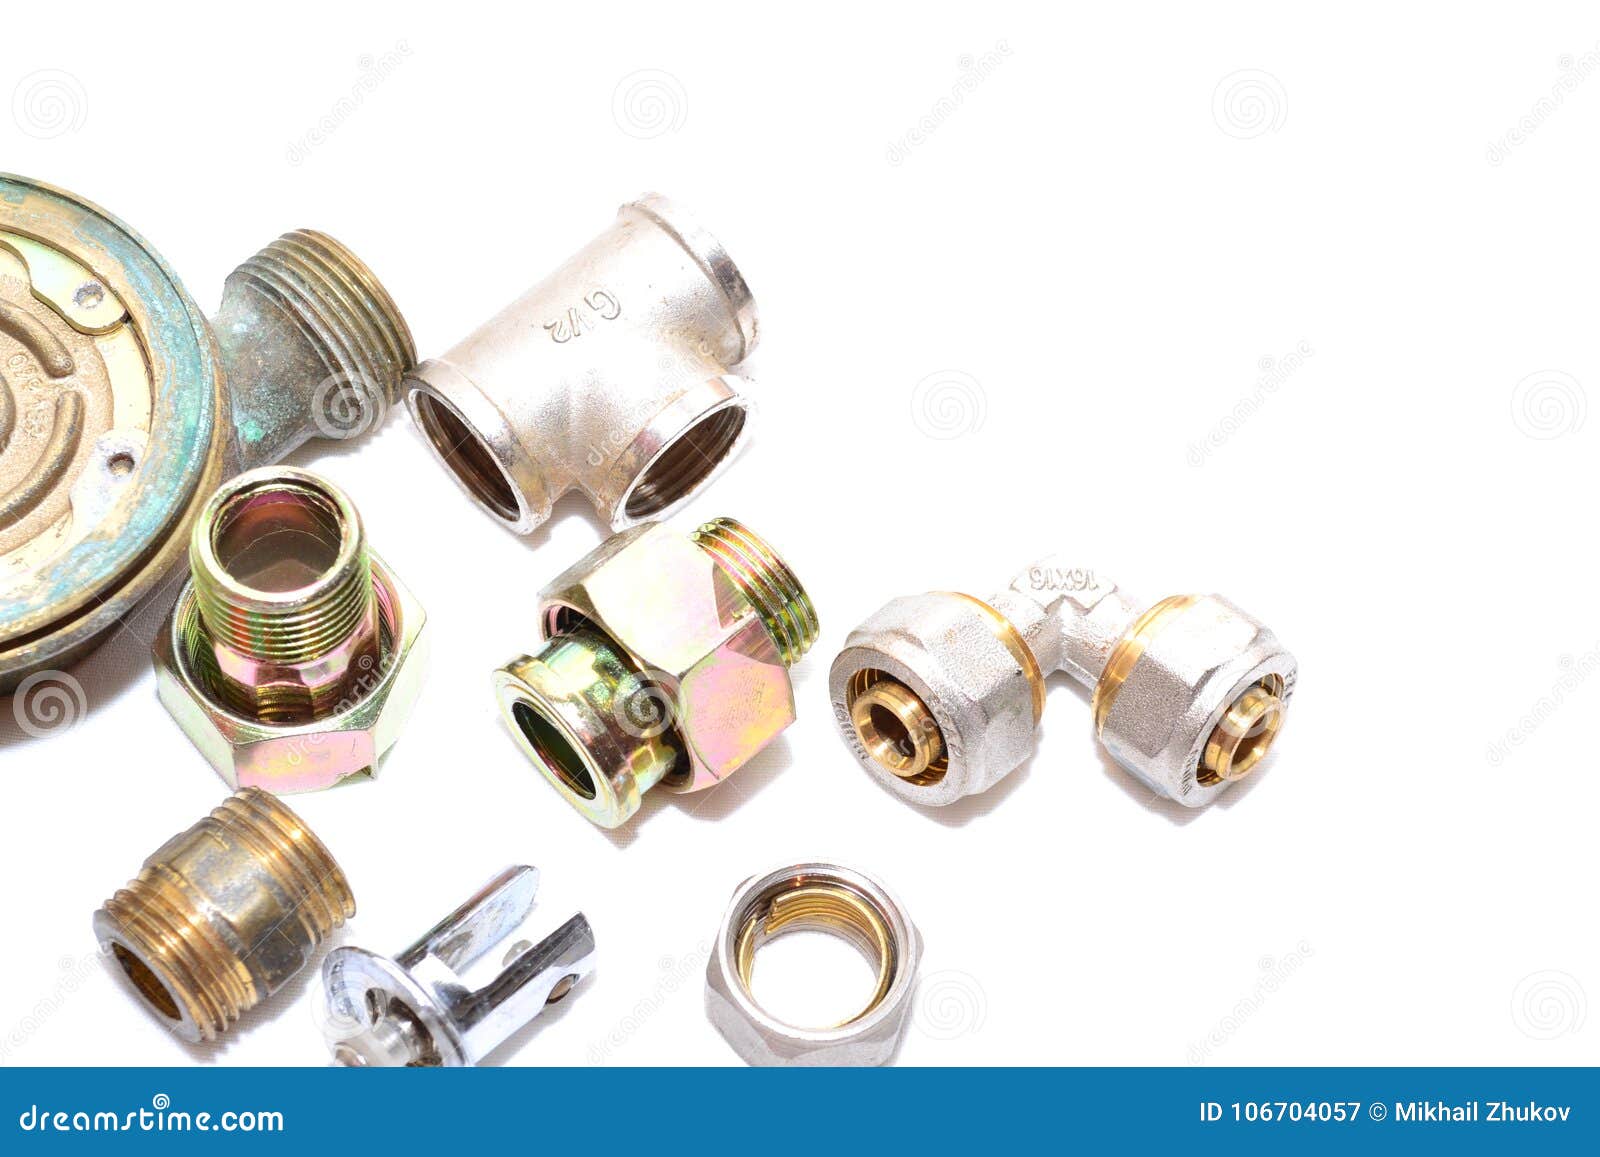 Sewerage And Water Supply Stock Image Image Of Business 106704057